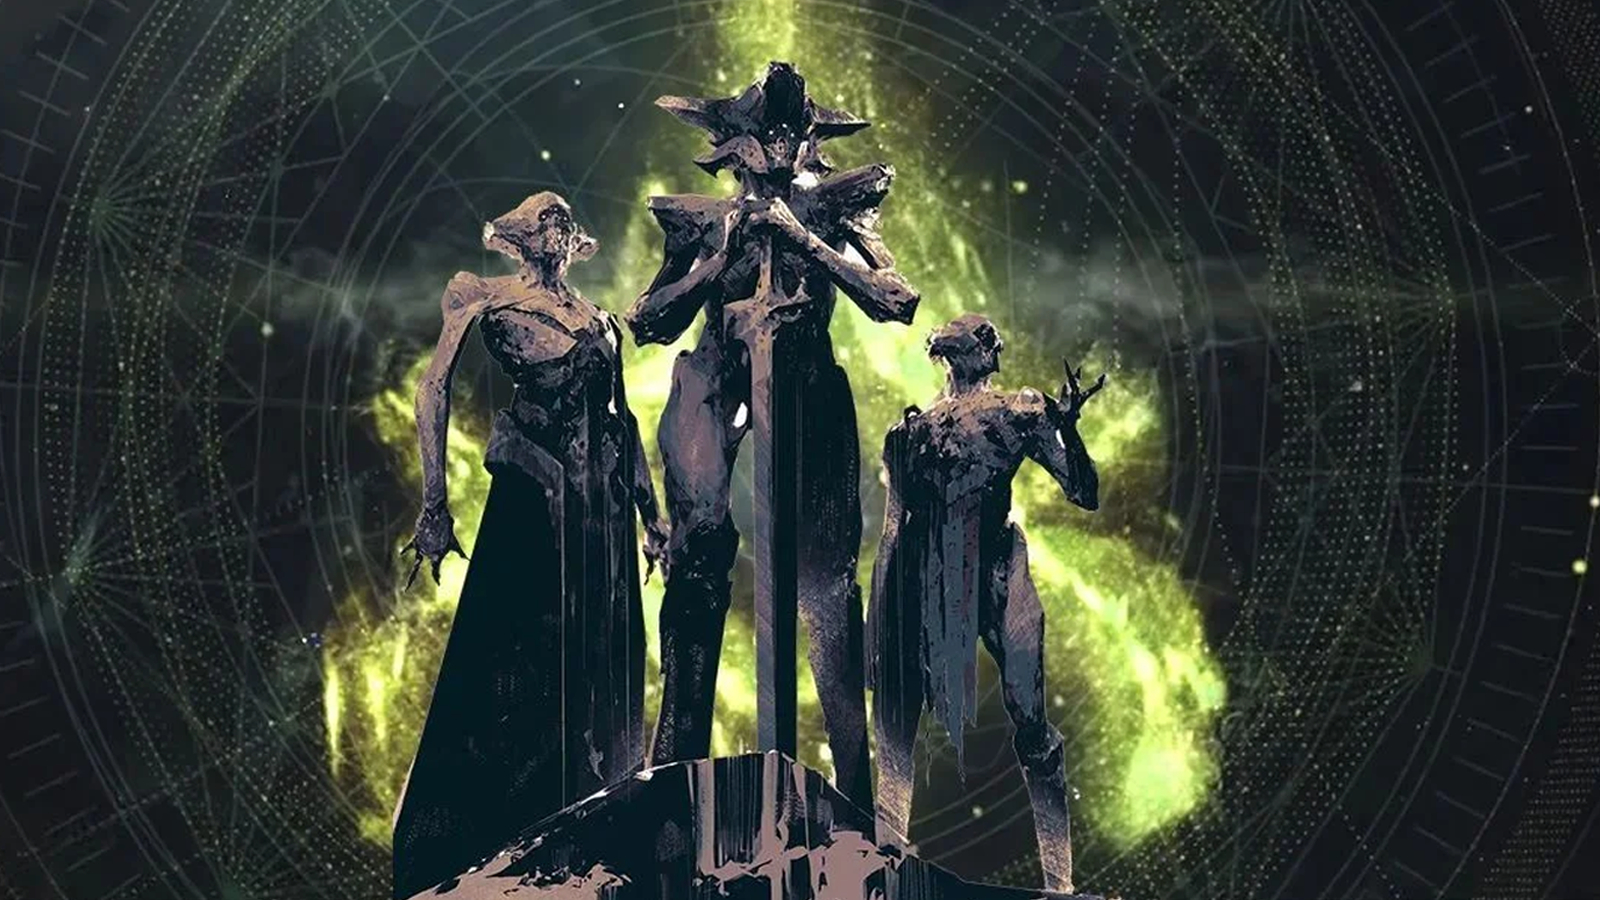 Destiny 2 delays The Witch Queen release date until early 2022